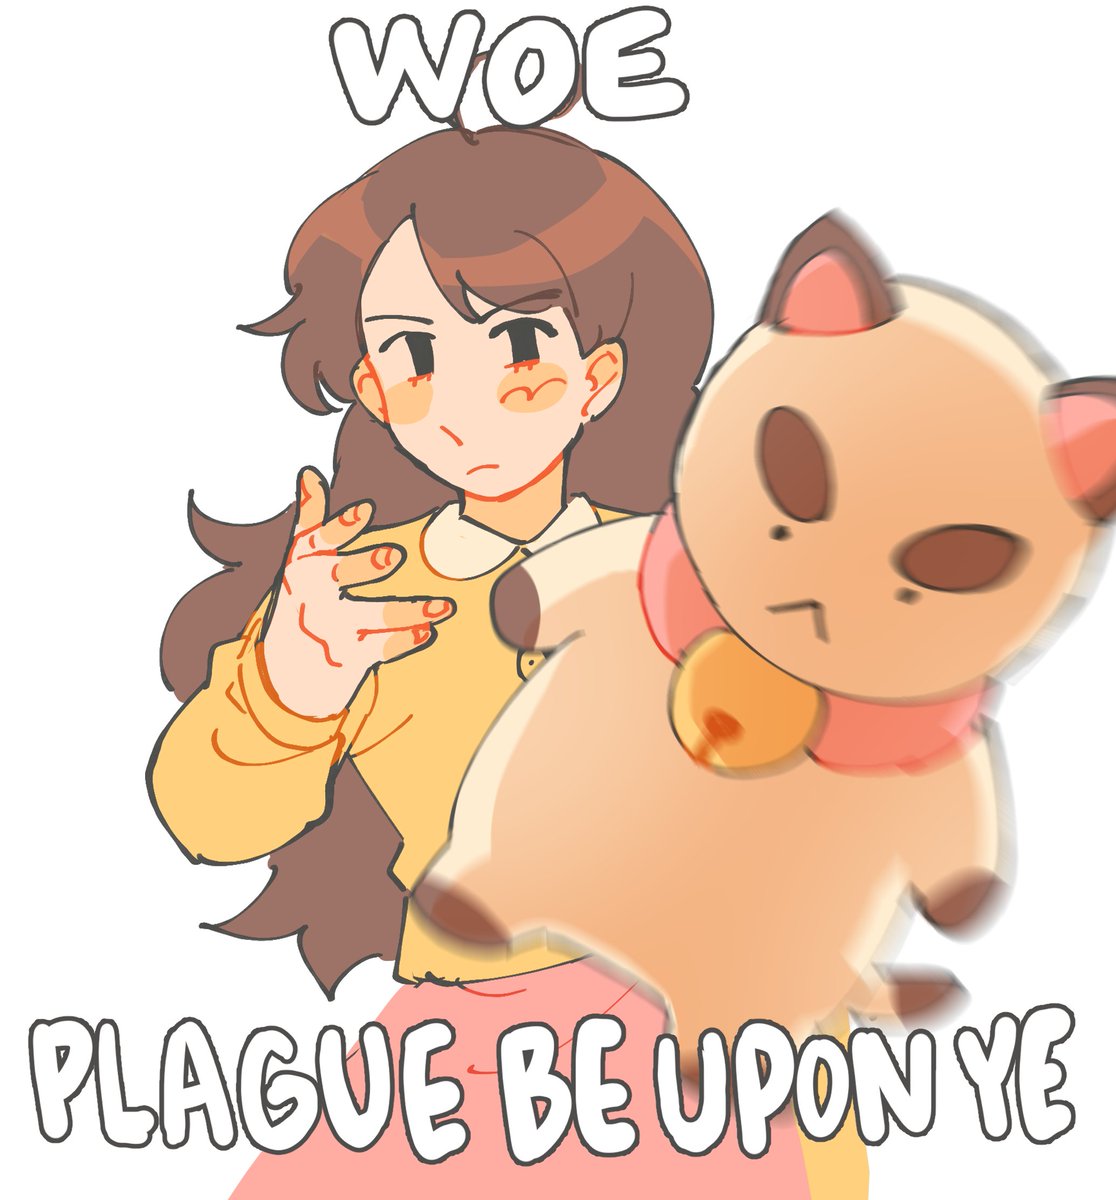 RT @GOOMYLOID: bee and puppycat https://t.co/70ovni0Cwa